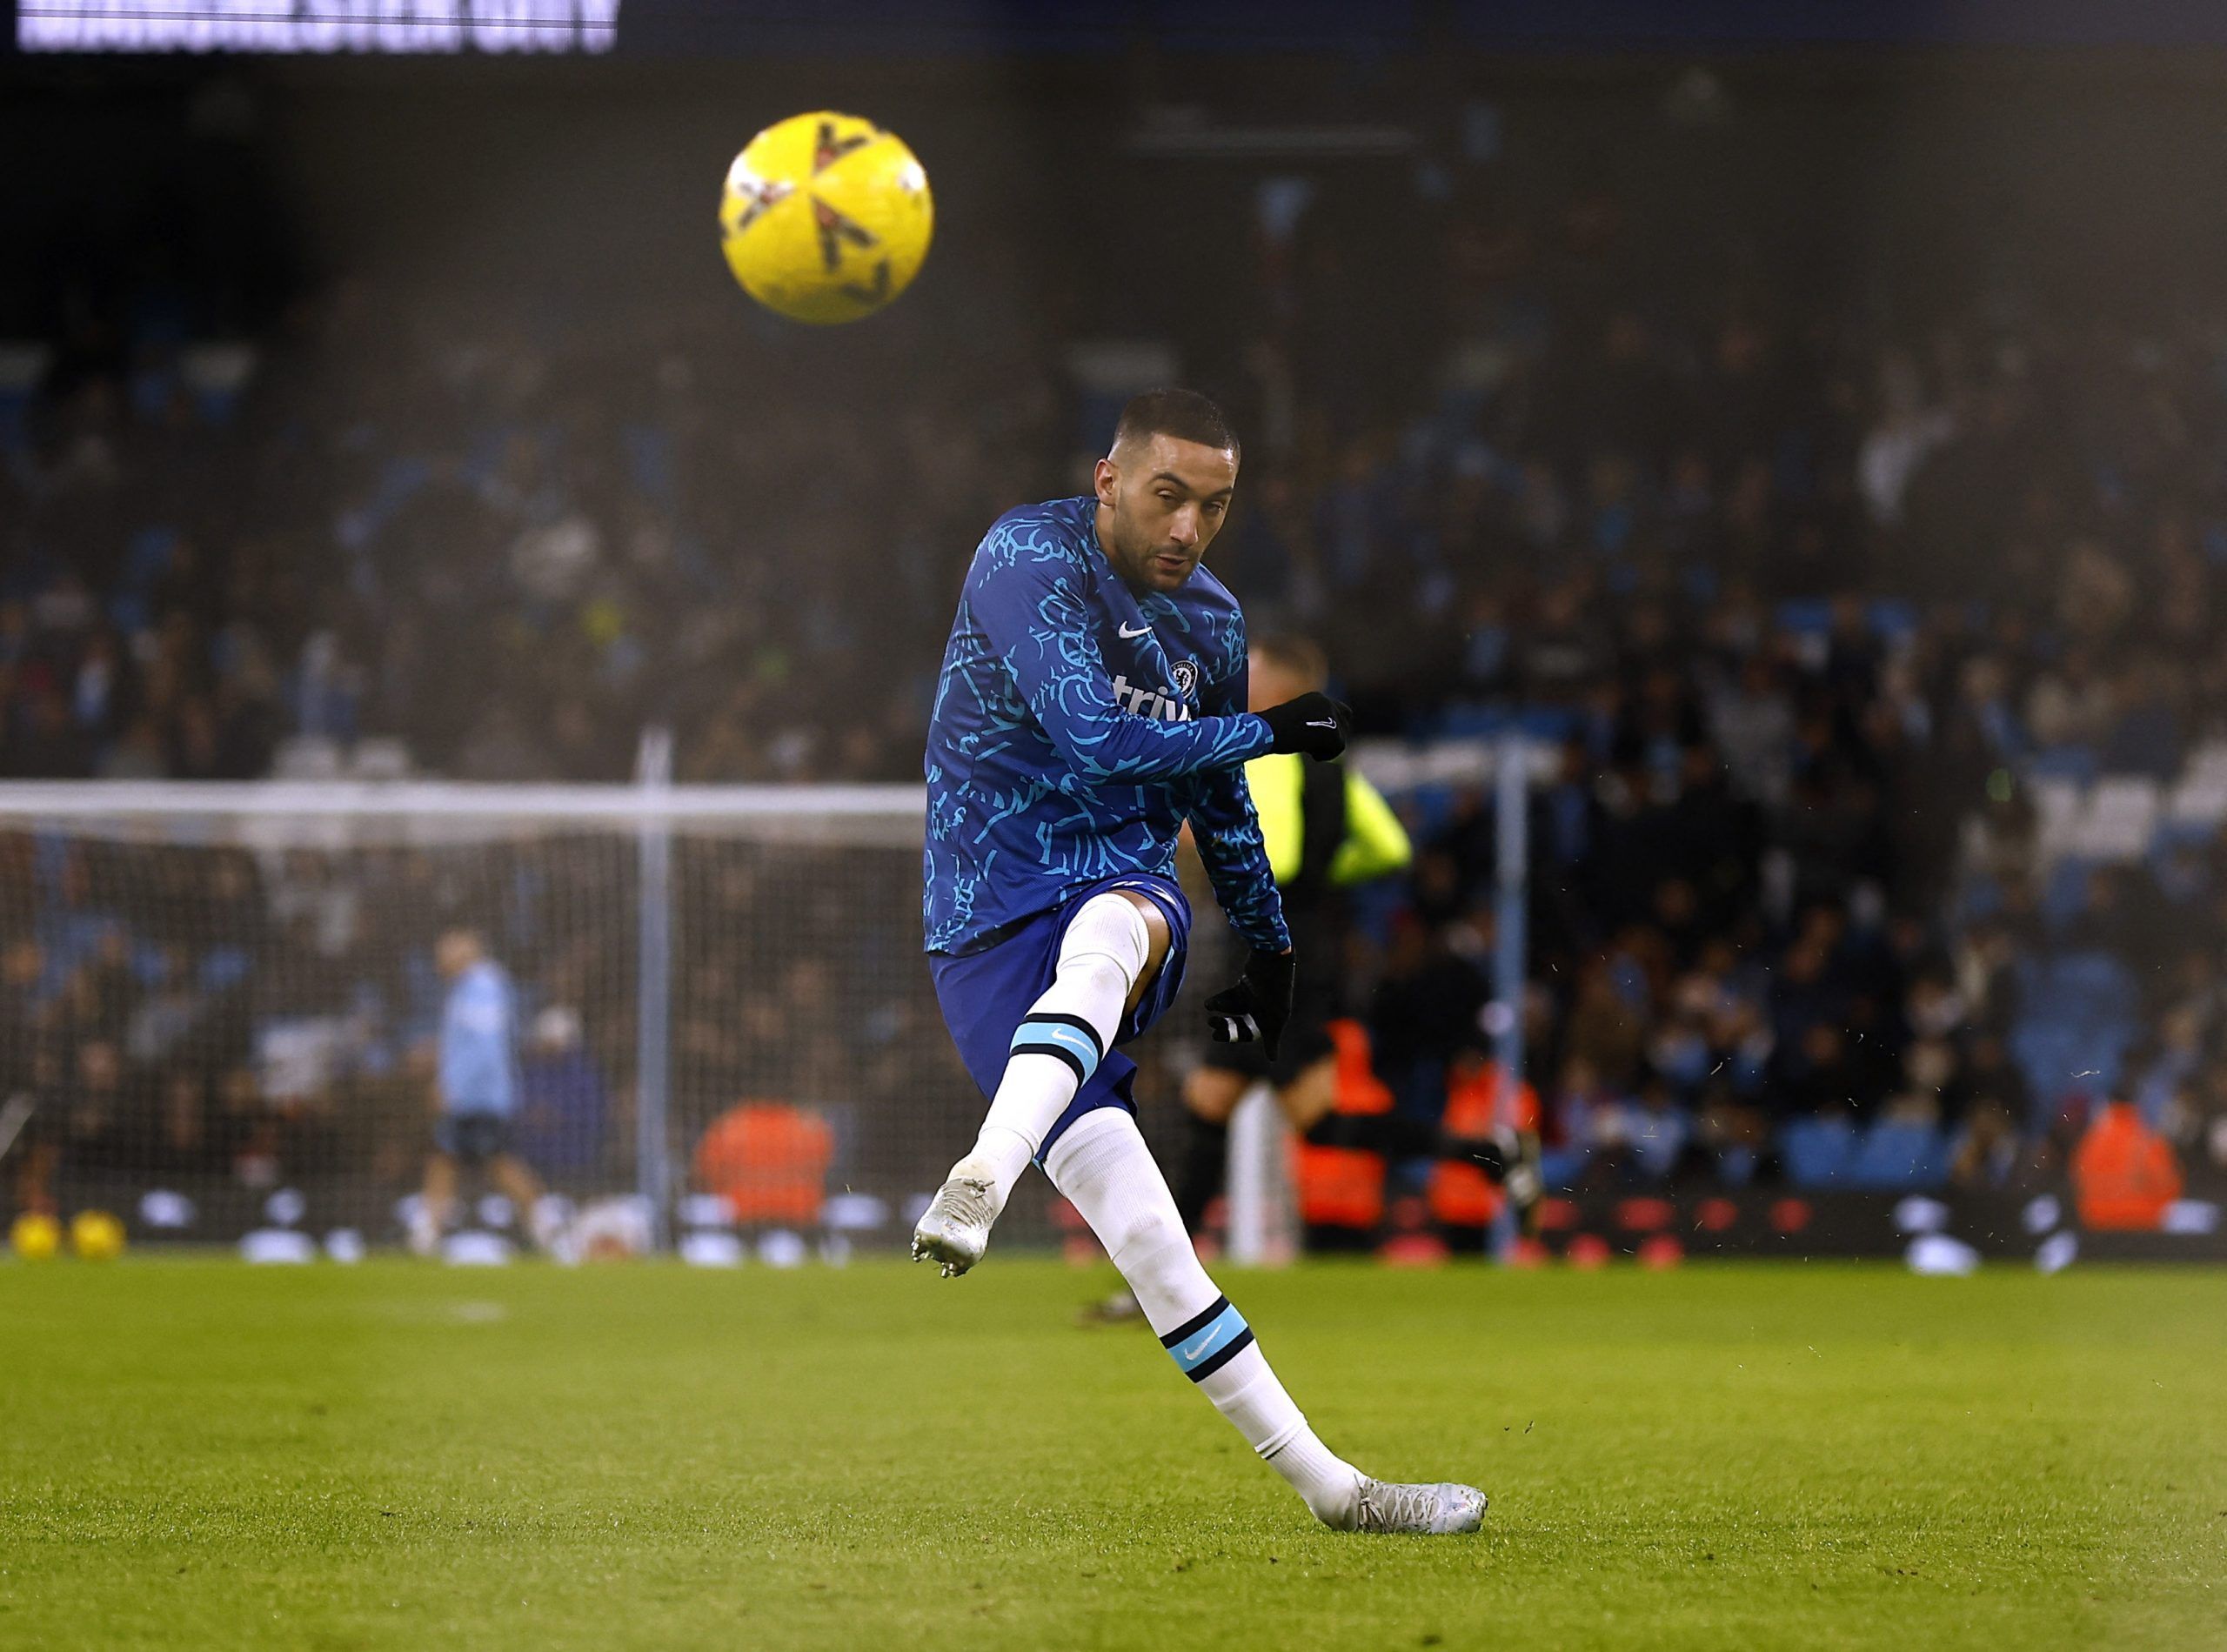 Soccer Football - FA Cup Third Round - Manchester City v Chelsea - Etihad Stadium, Manchester, Britain - January 8, 2023 Chelsea's Hakim Ziyech during the warm up before the match Action Images via Reuters/Jason Cairnduff